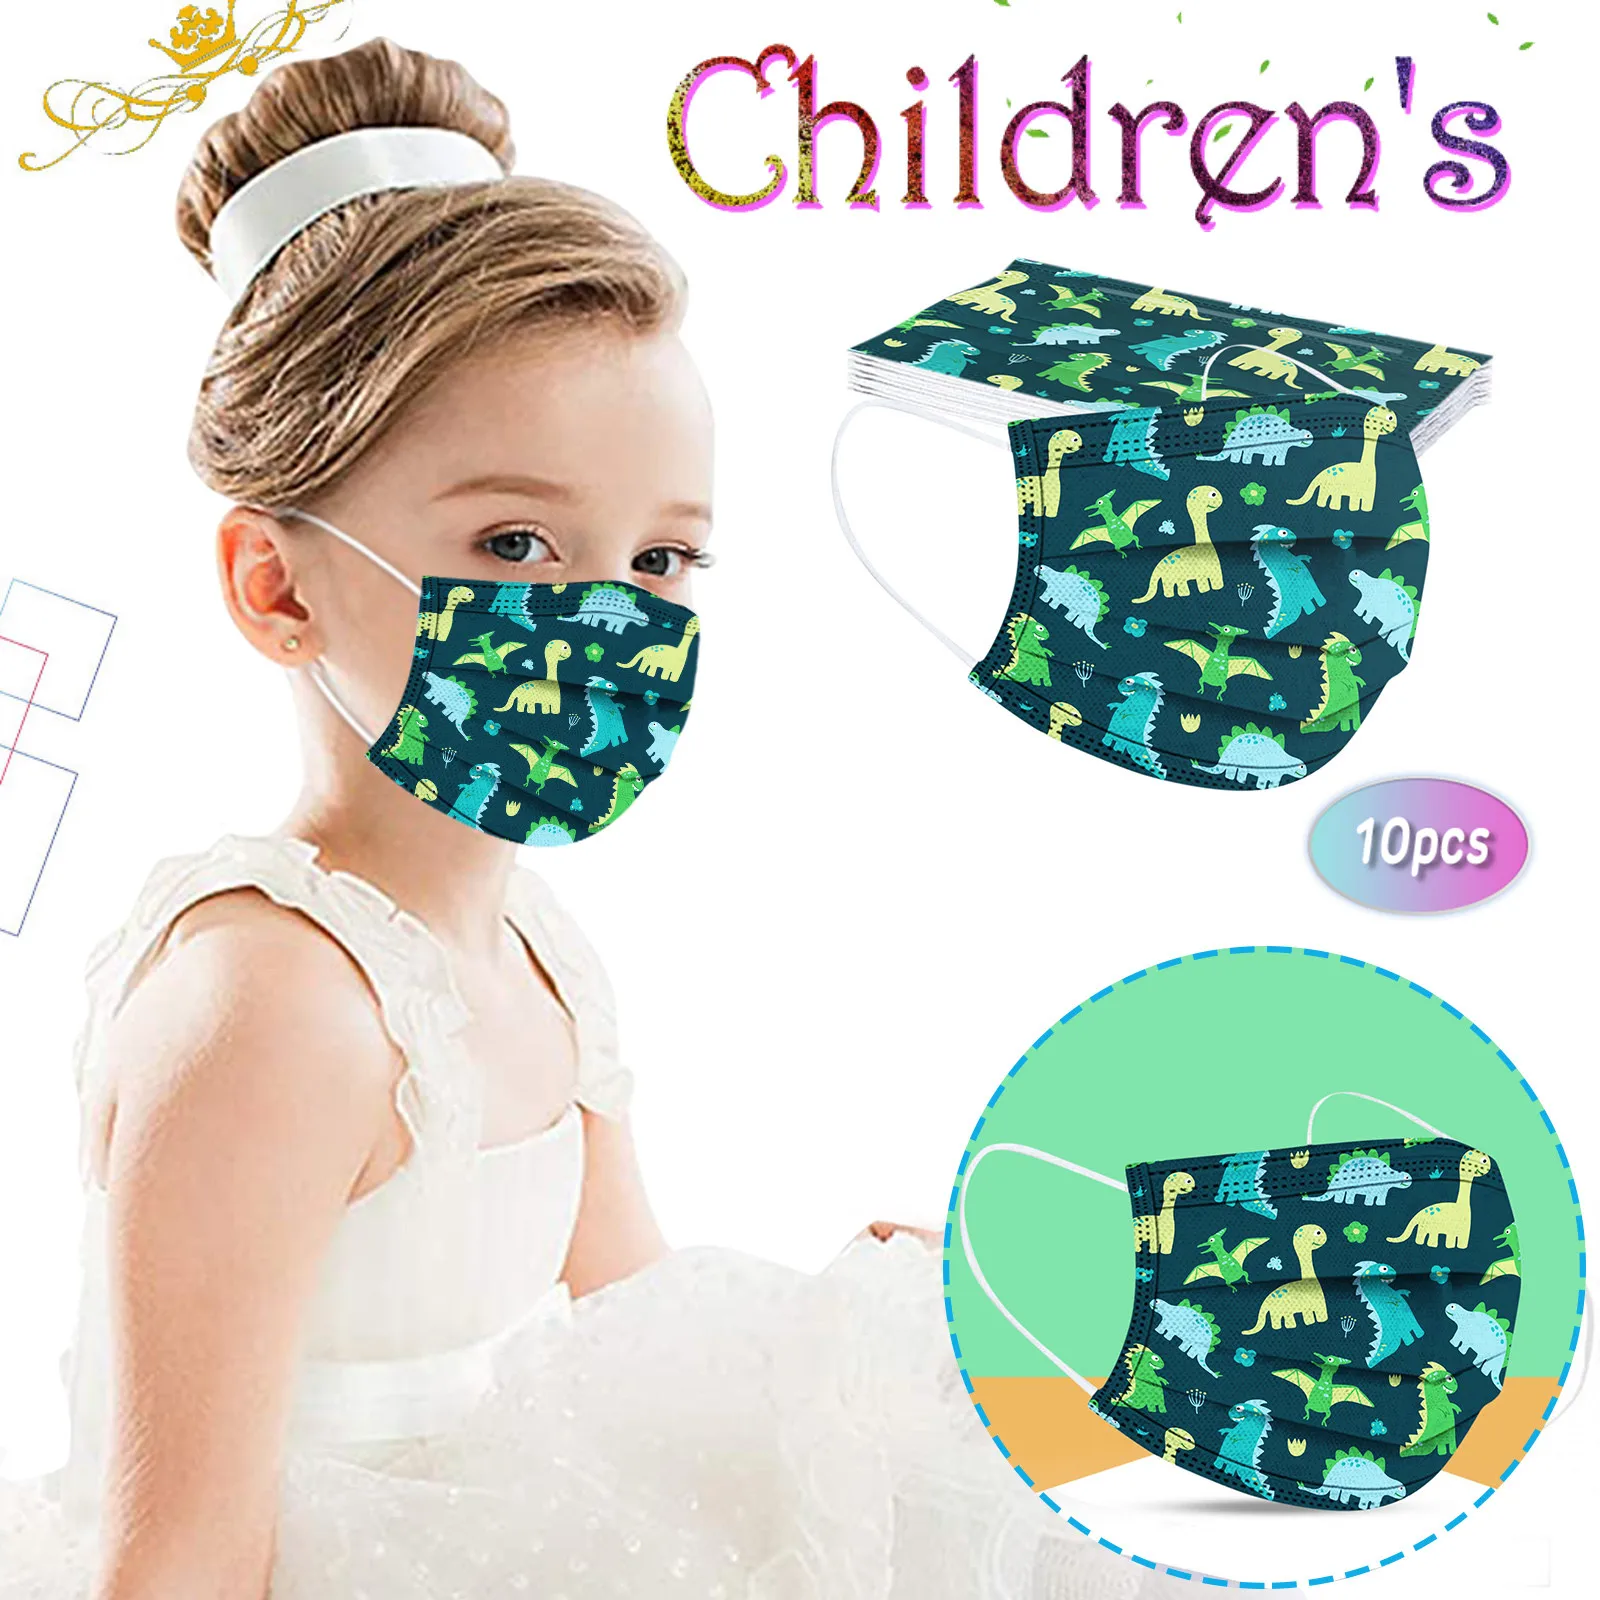 

10/50PC Child Dinosaur Face Mask Disposable Cartoon Mask For Kids Children 3ply Anti-dust Pm2.5 Mouth Masks Earloop Bandage